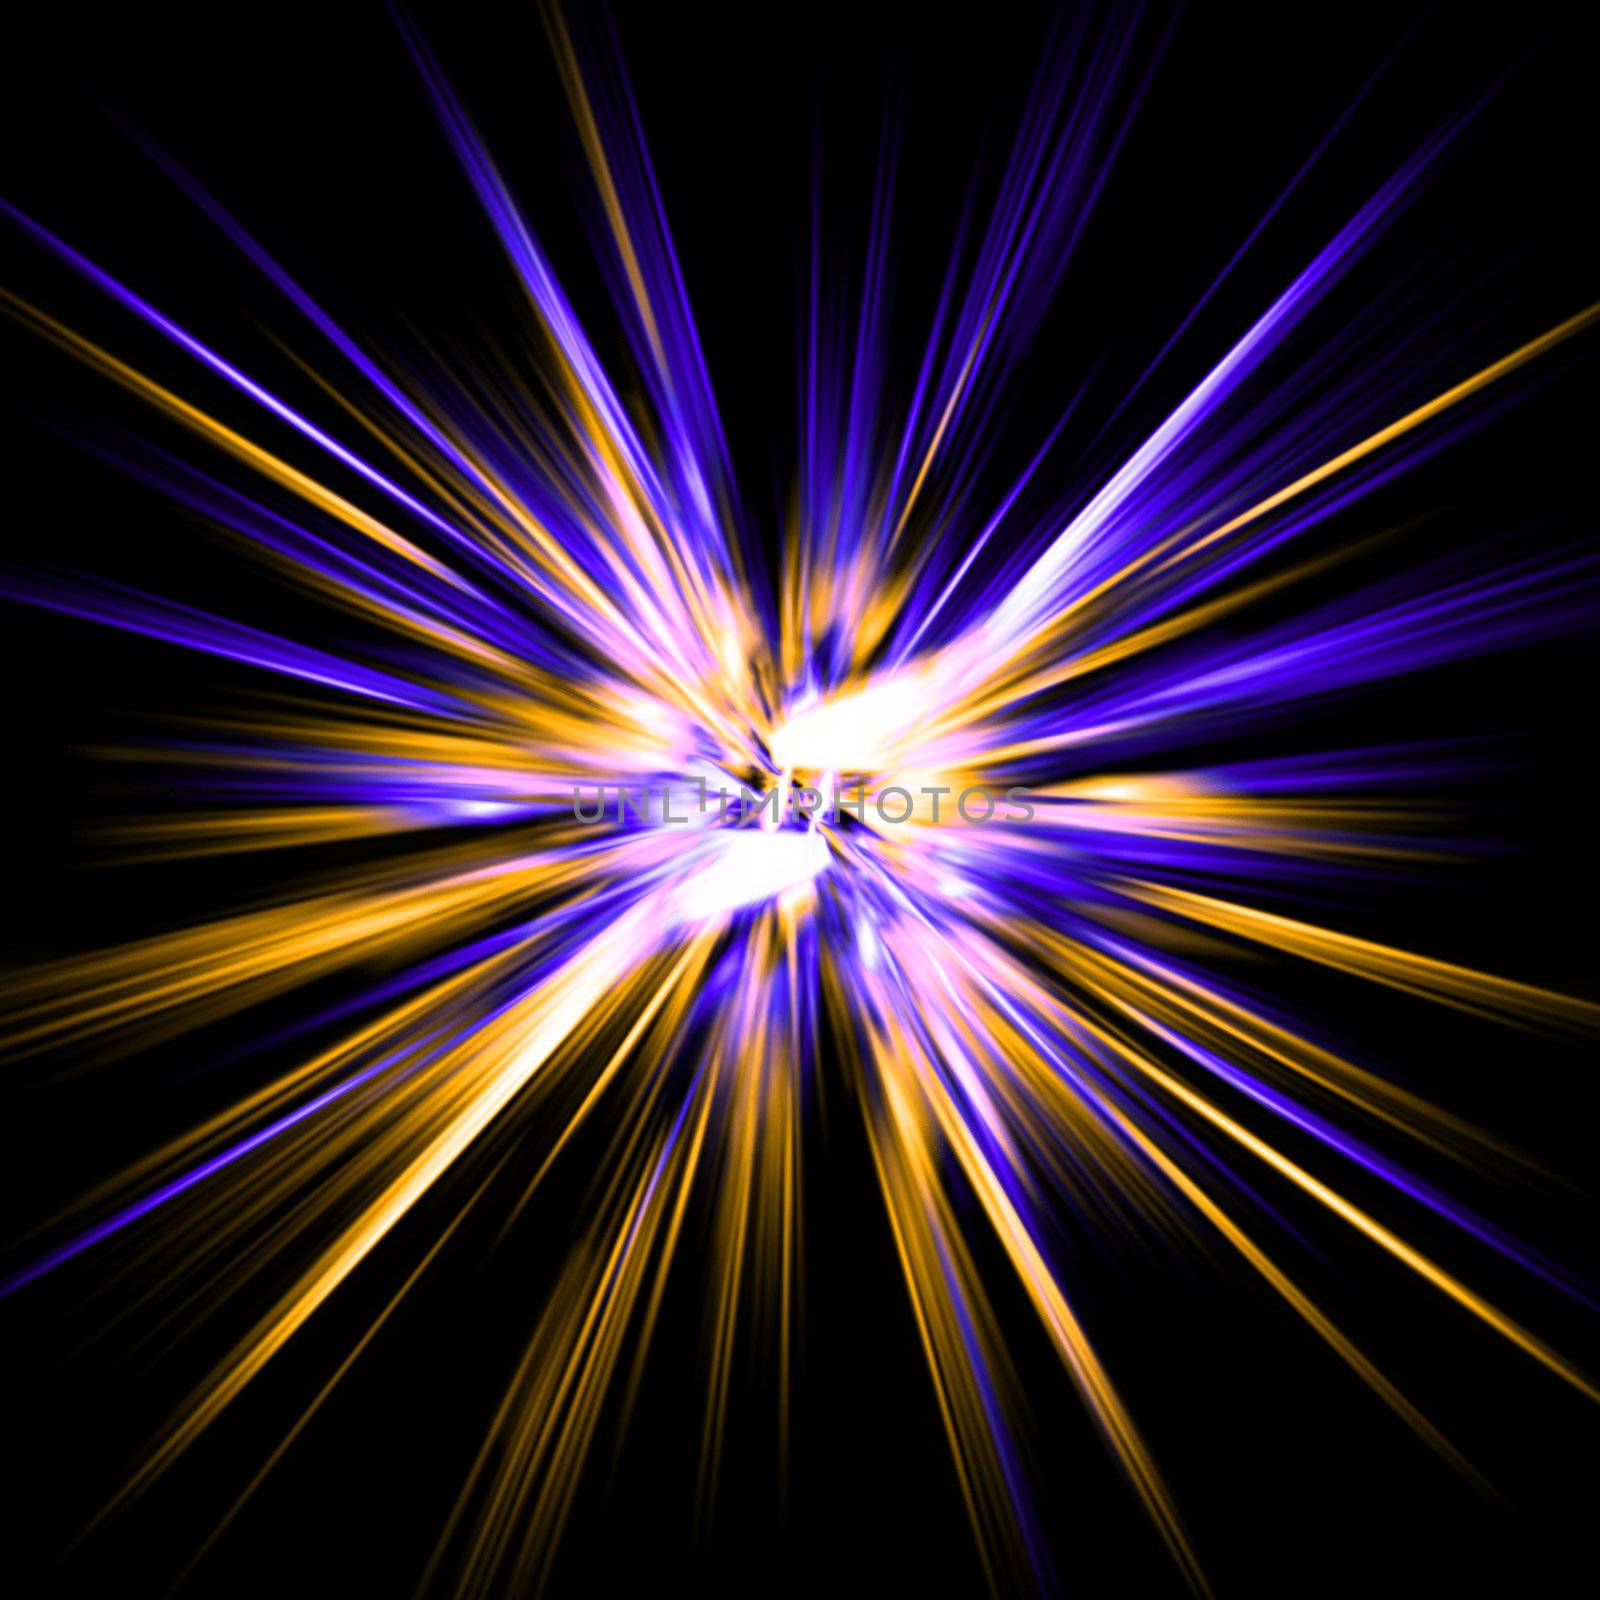 nice  explosion background generated by the computer 